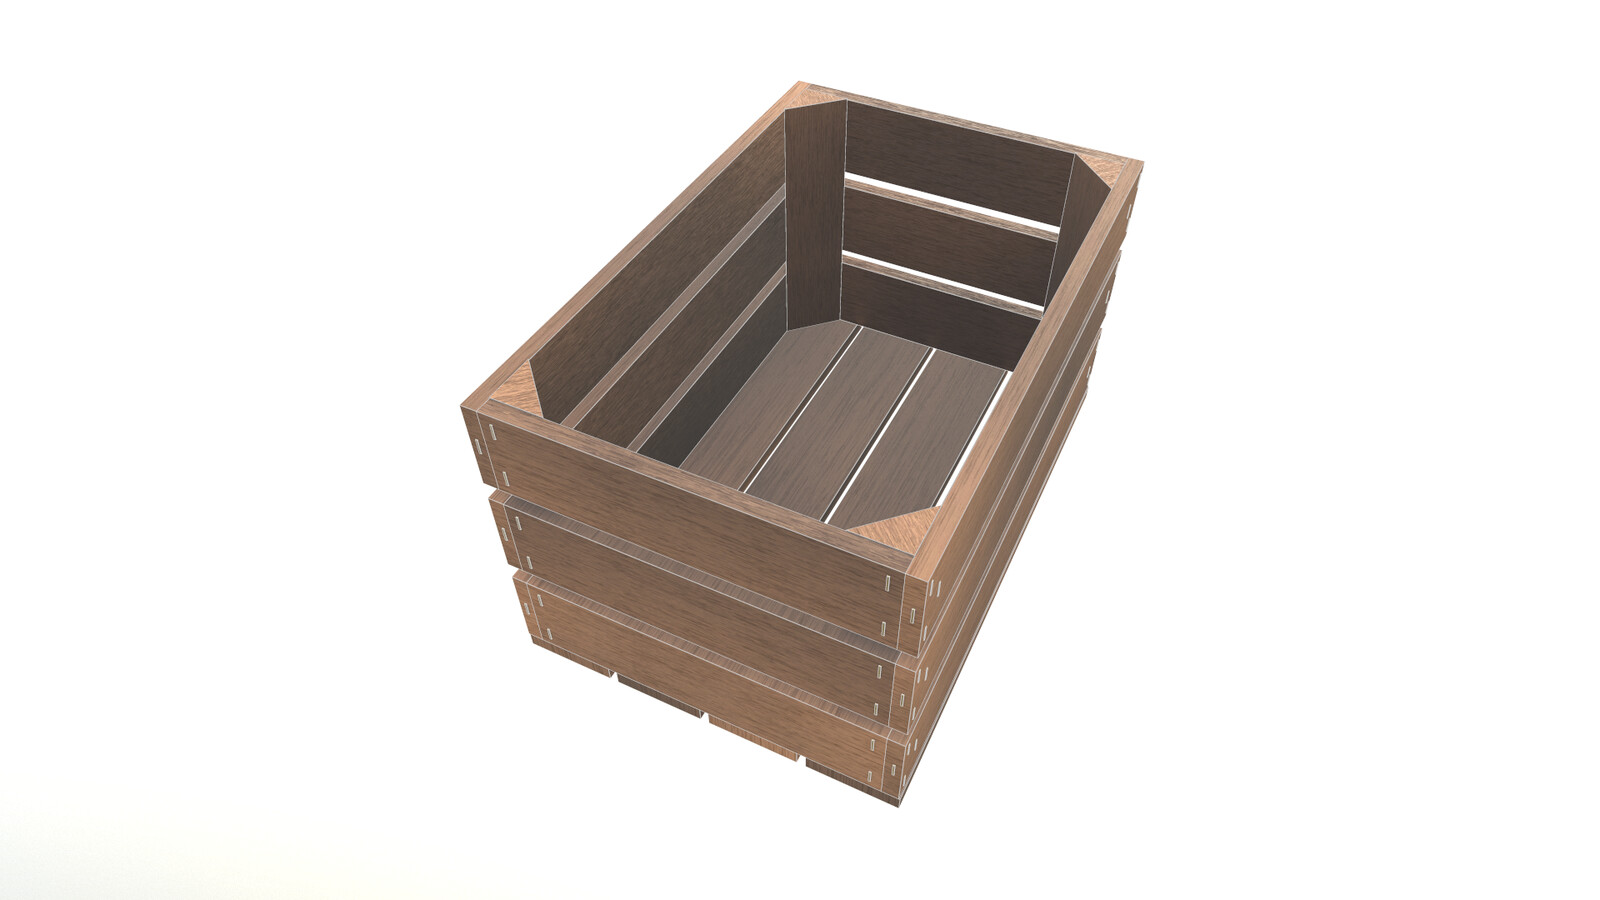 Wooden Crate wireframe 4